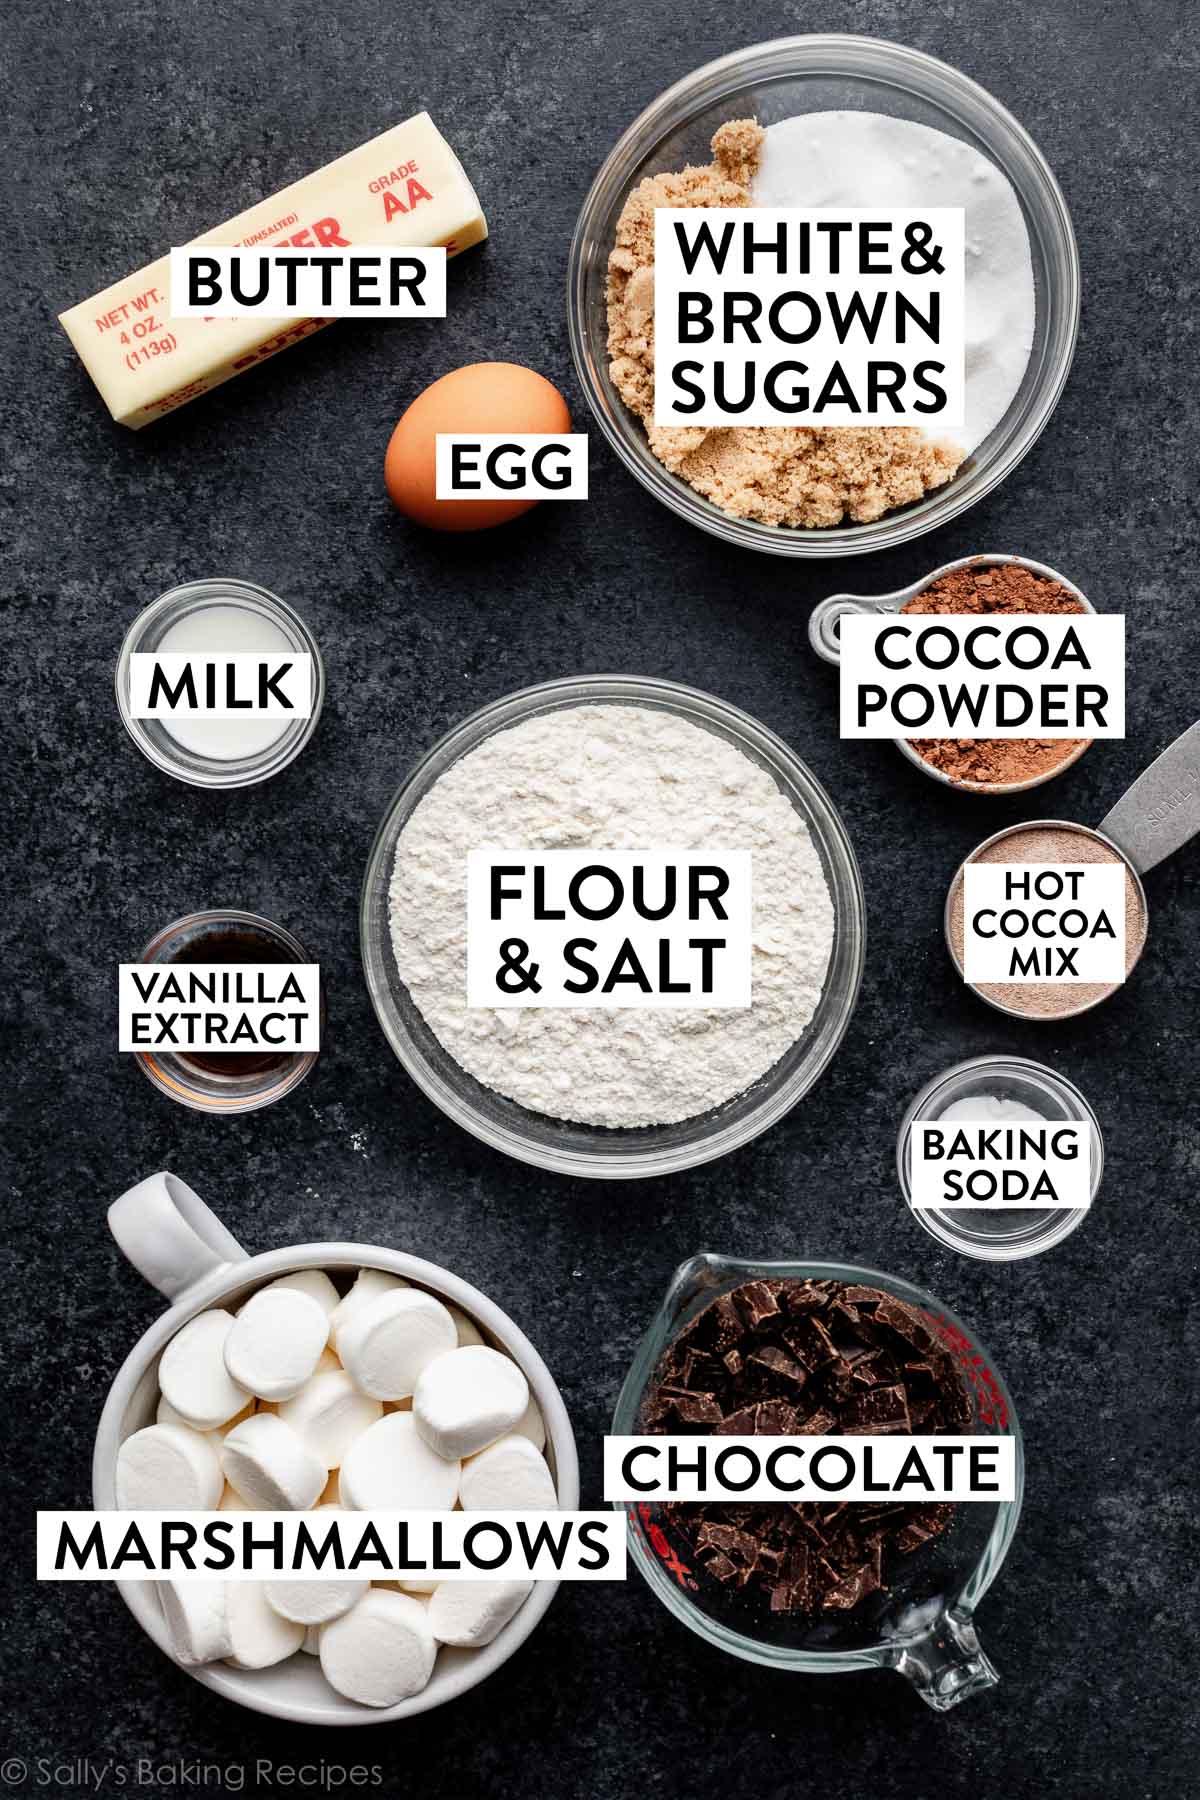 ingredients on black-ish blue-ish backdrop including butter, brown and white sugars, chocolate, flour, salt, cocoa, and hot cocoa mix.